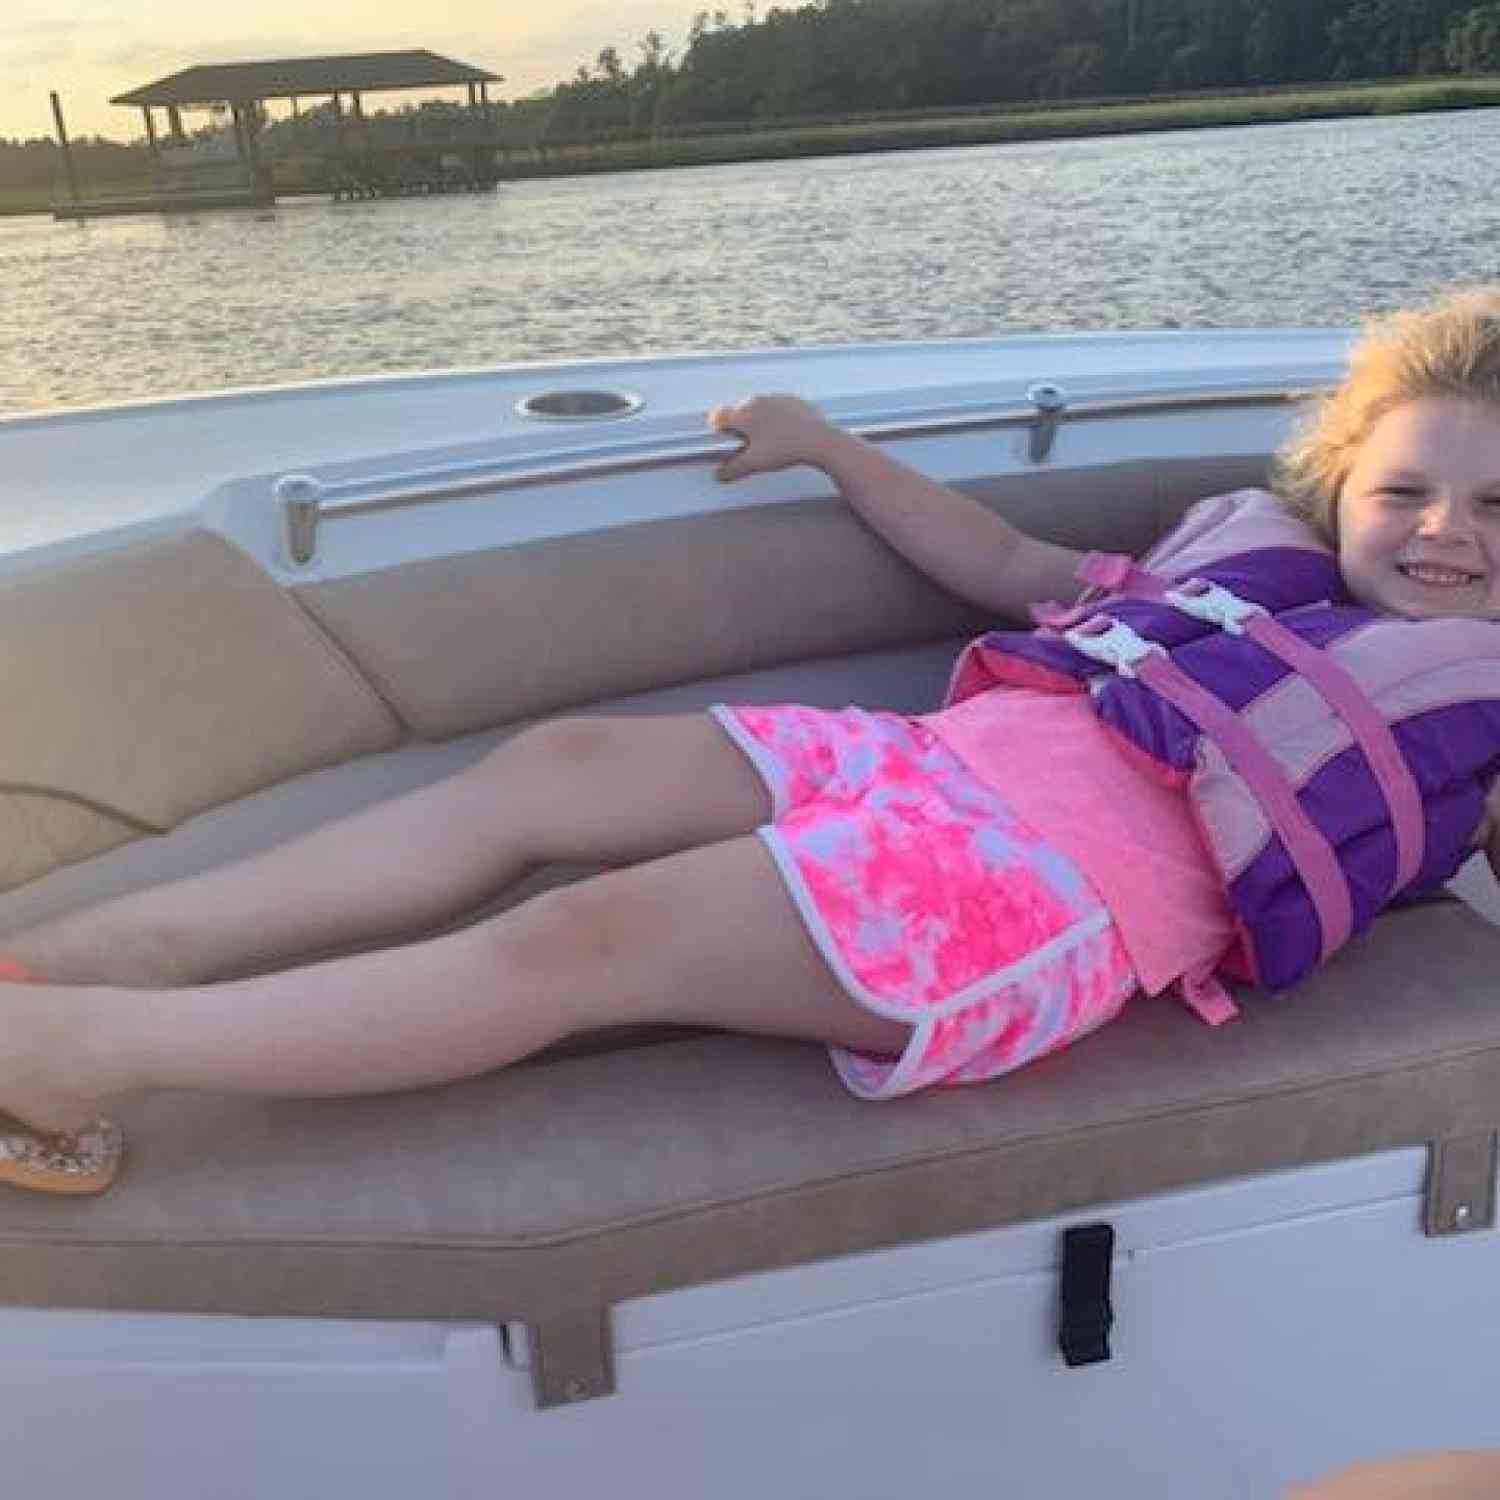 Title: Stretching out! - On board their Sportsman Open 212 Center Console - Location: Jerico River Richmond Hill, GA. Participating in the Photo Contest #SportsmanJuly2020